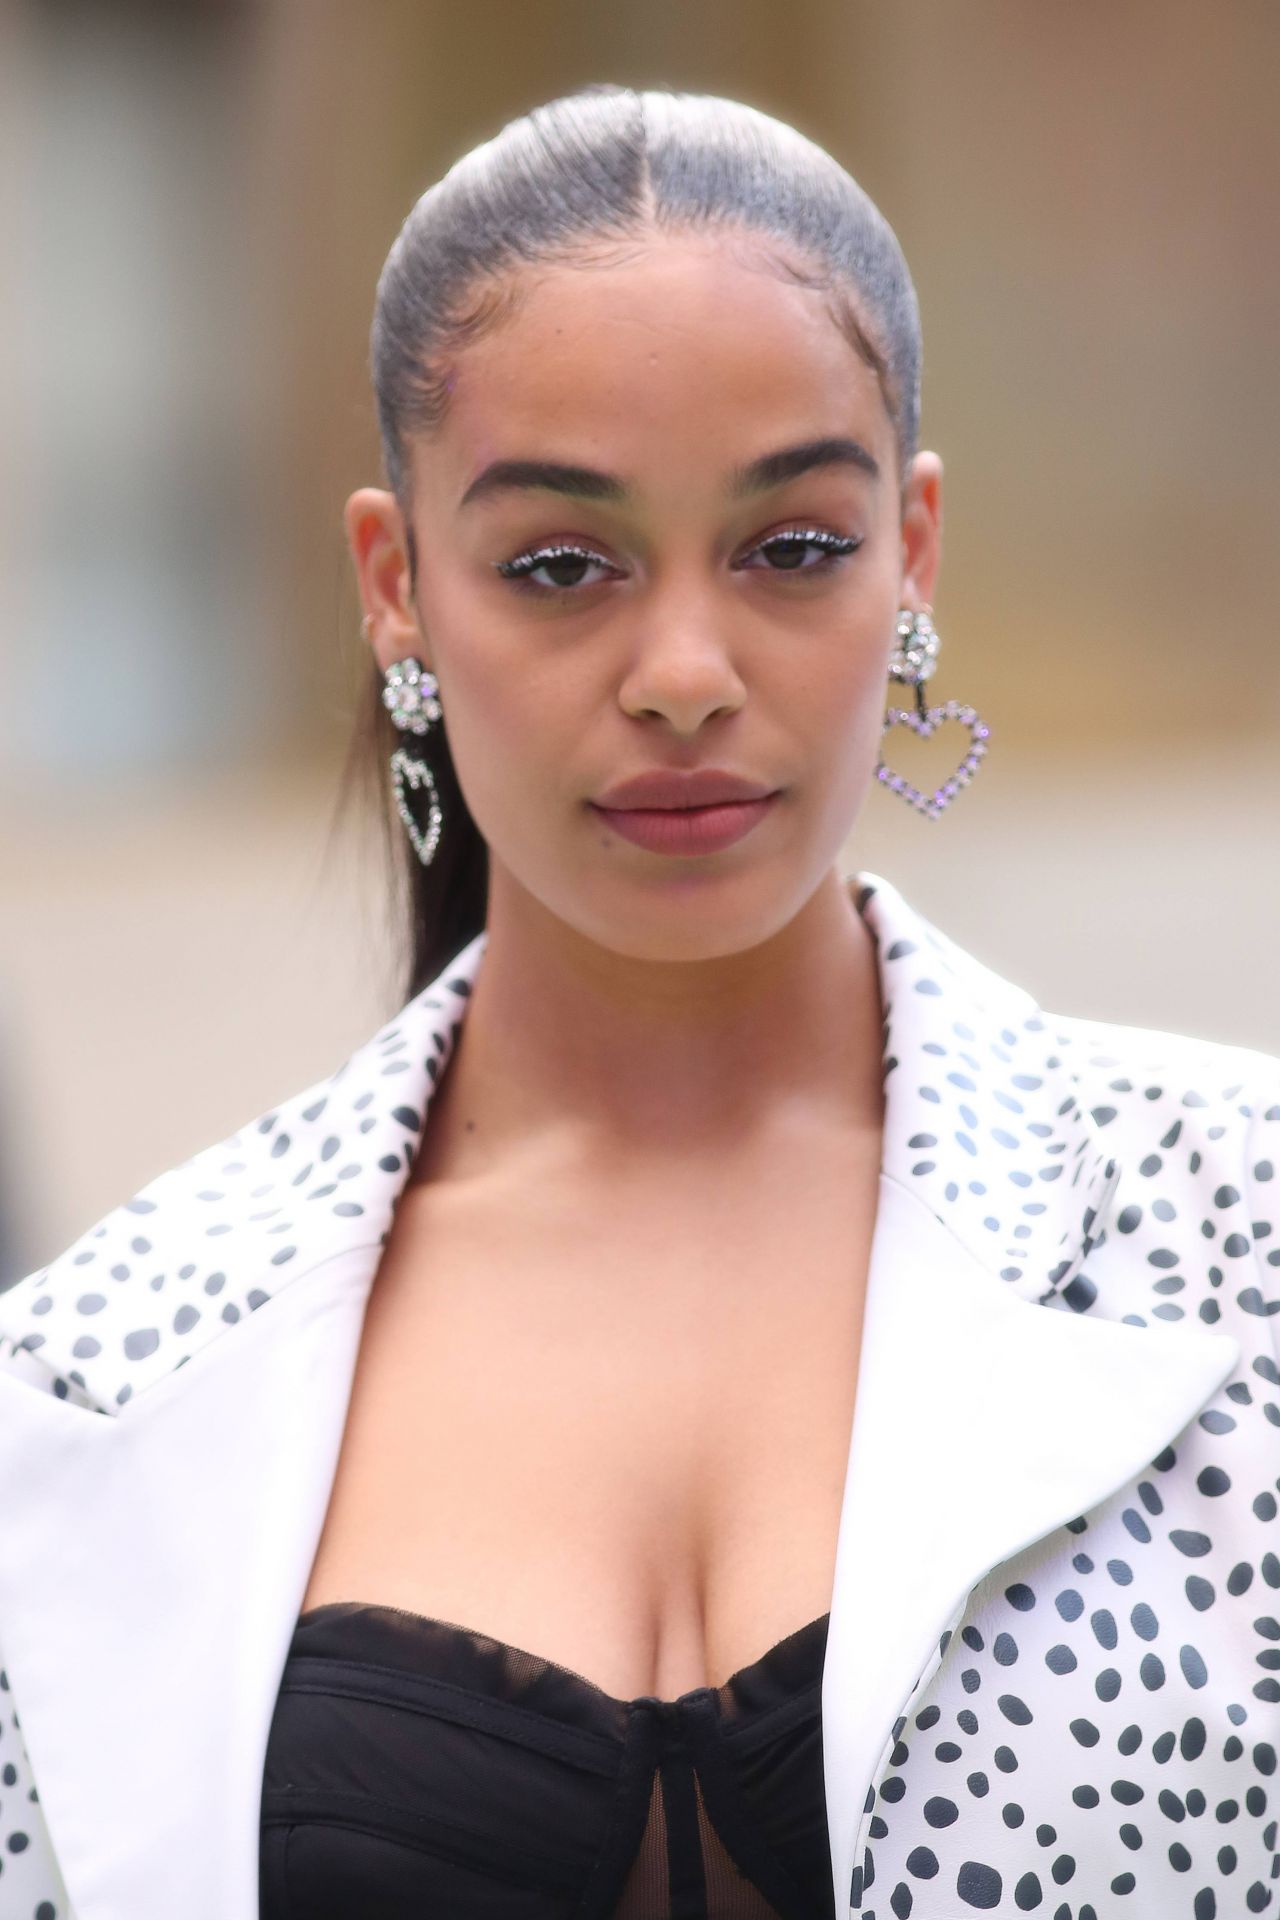 jorja-smith-royal-academy-of-arts-summer-exhibition-party-2019-in-london-5.jpg